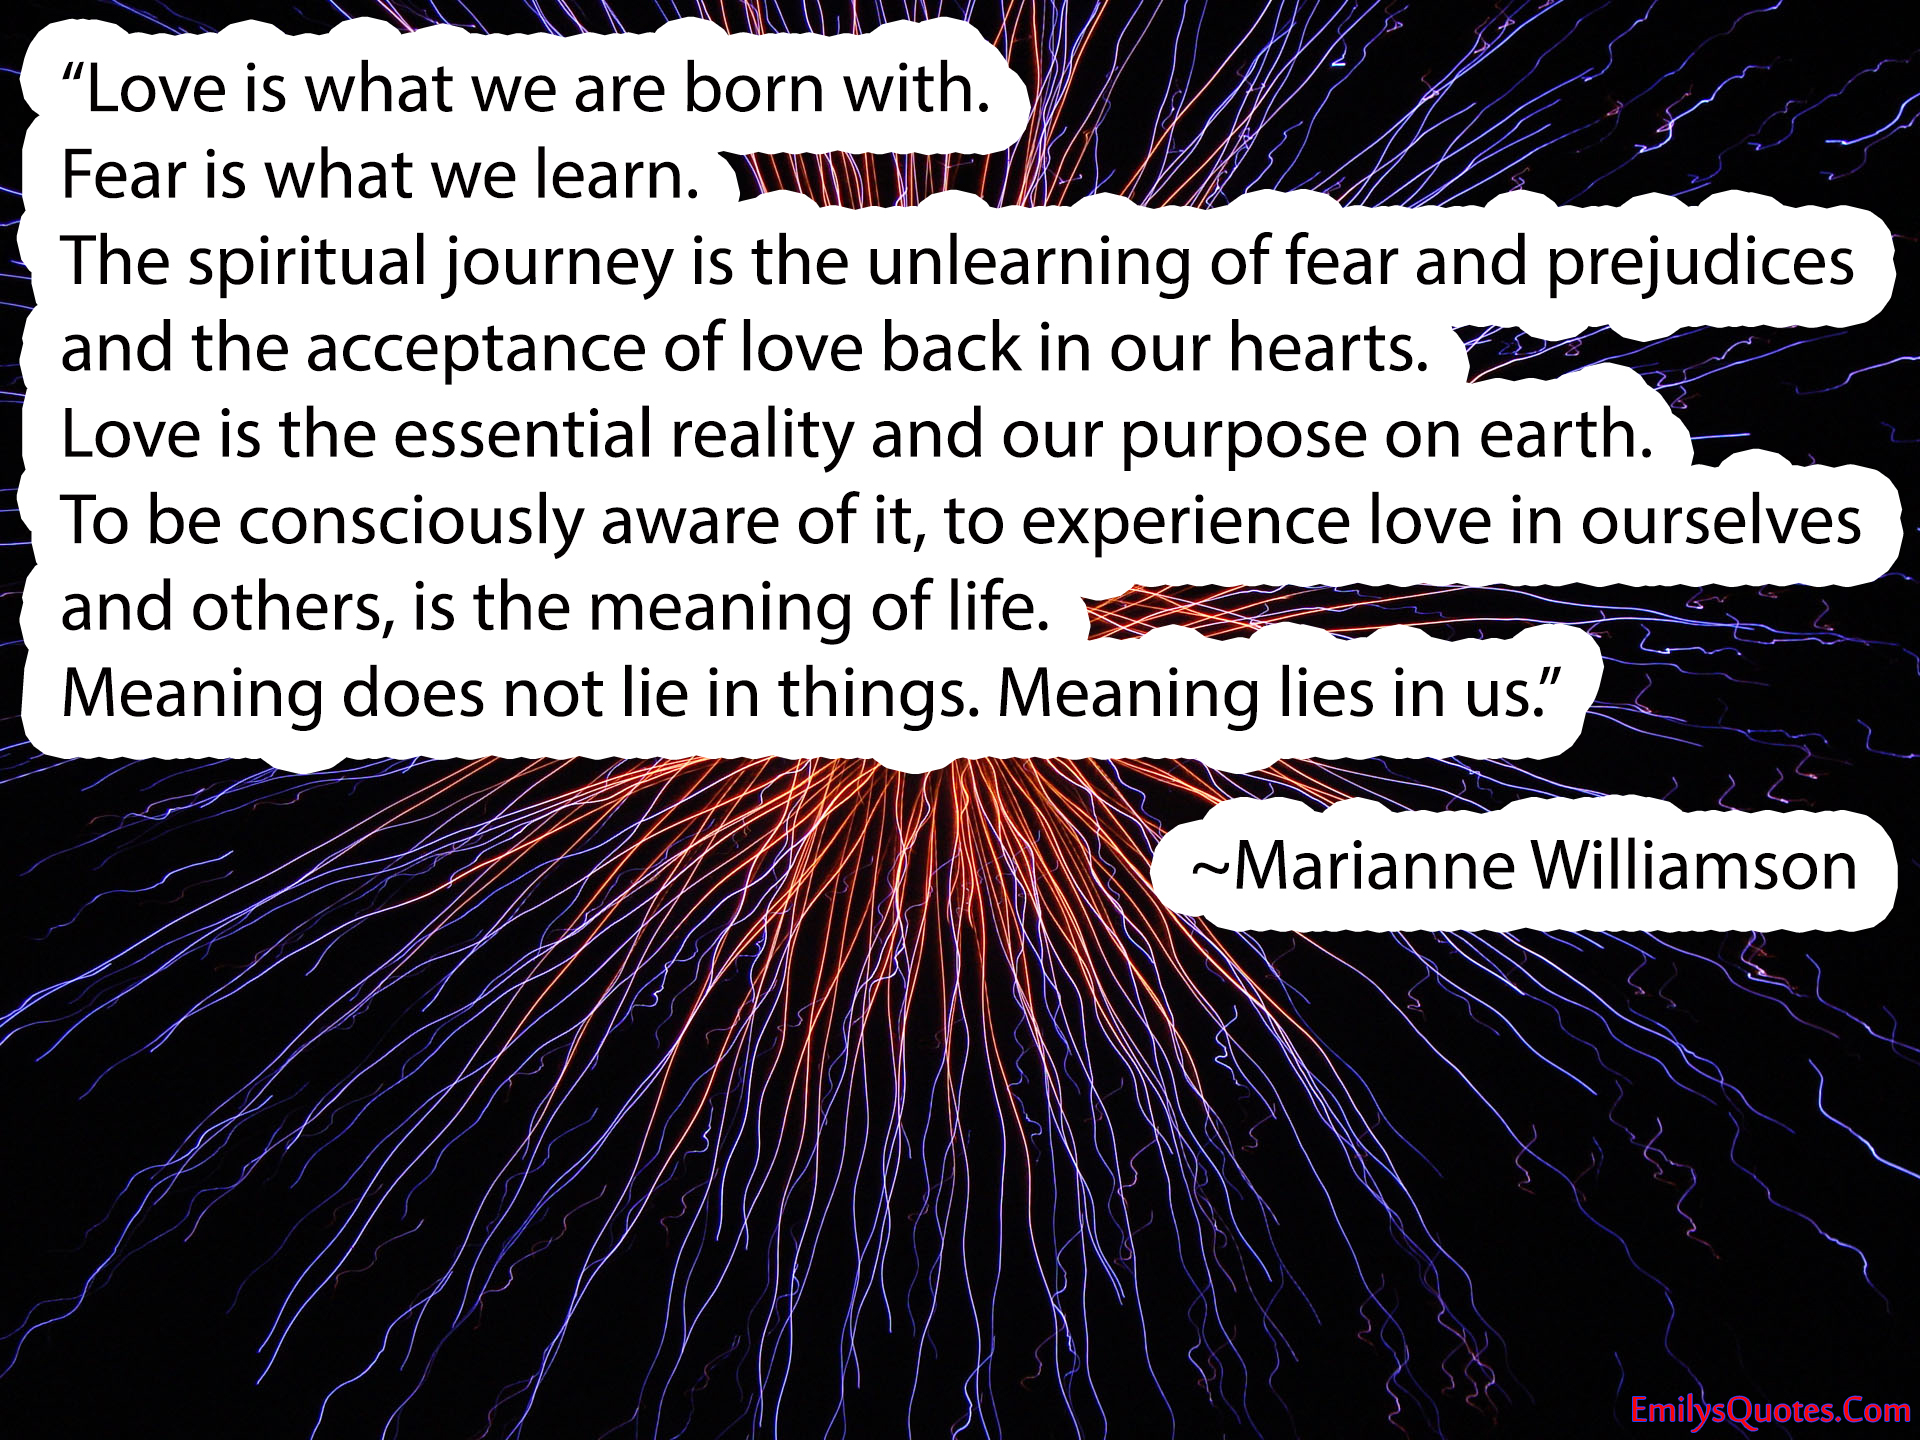 Love is what we are born with. Fear is what we learn. The spiritual journey is the unlearning of